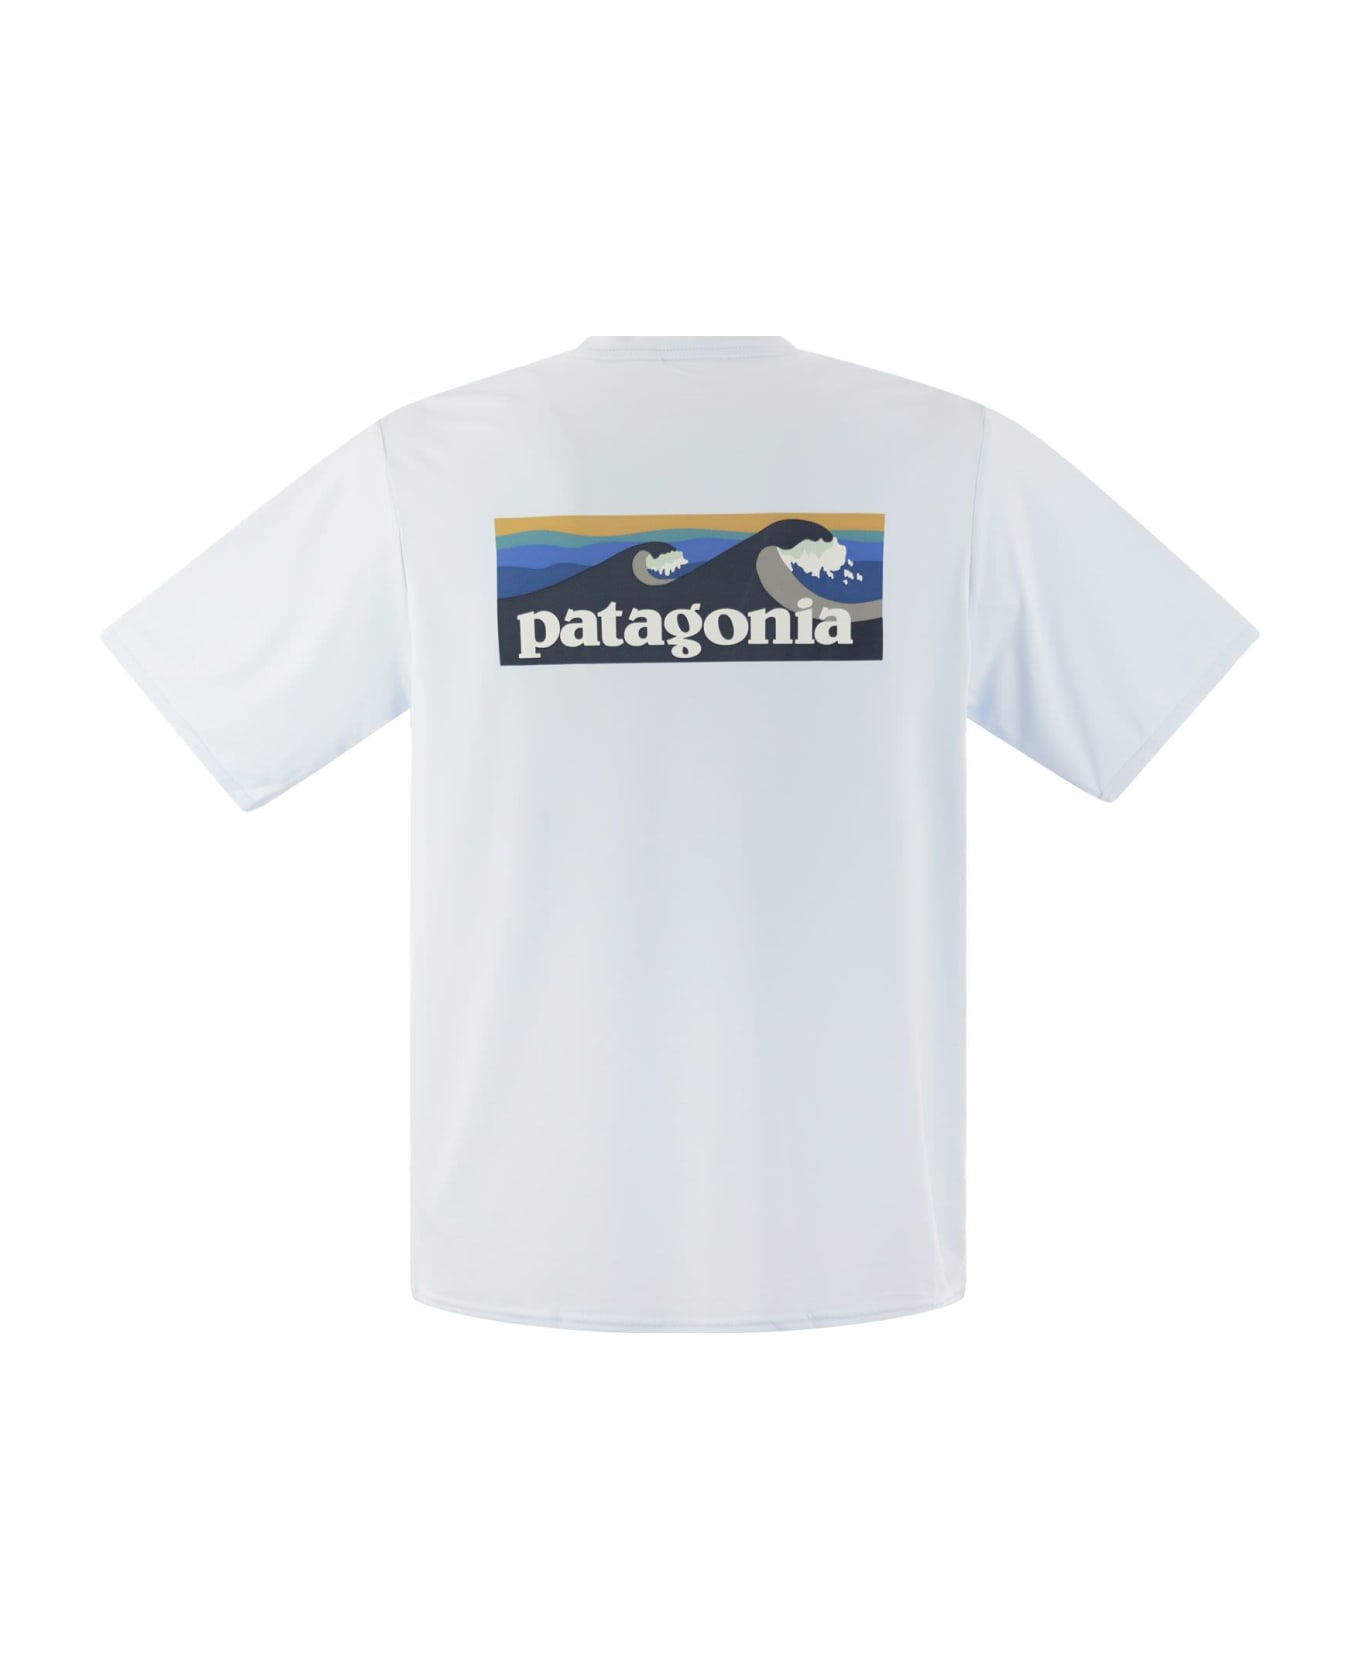 Patagonia T-shirt In Technical Fabric With Print On The Back - Light Blue